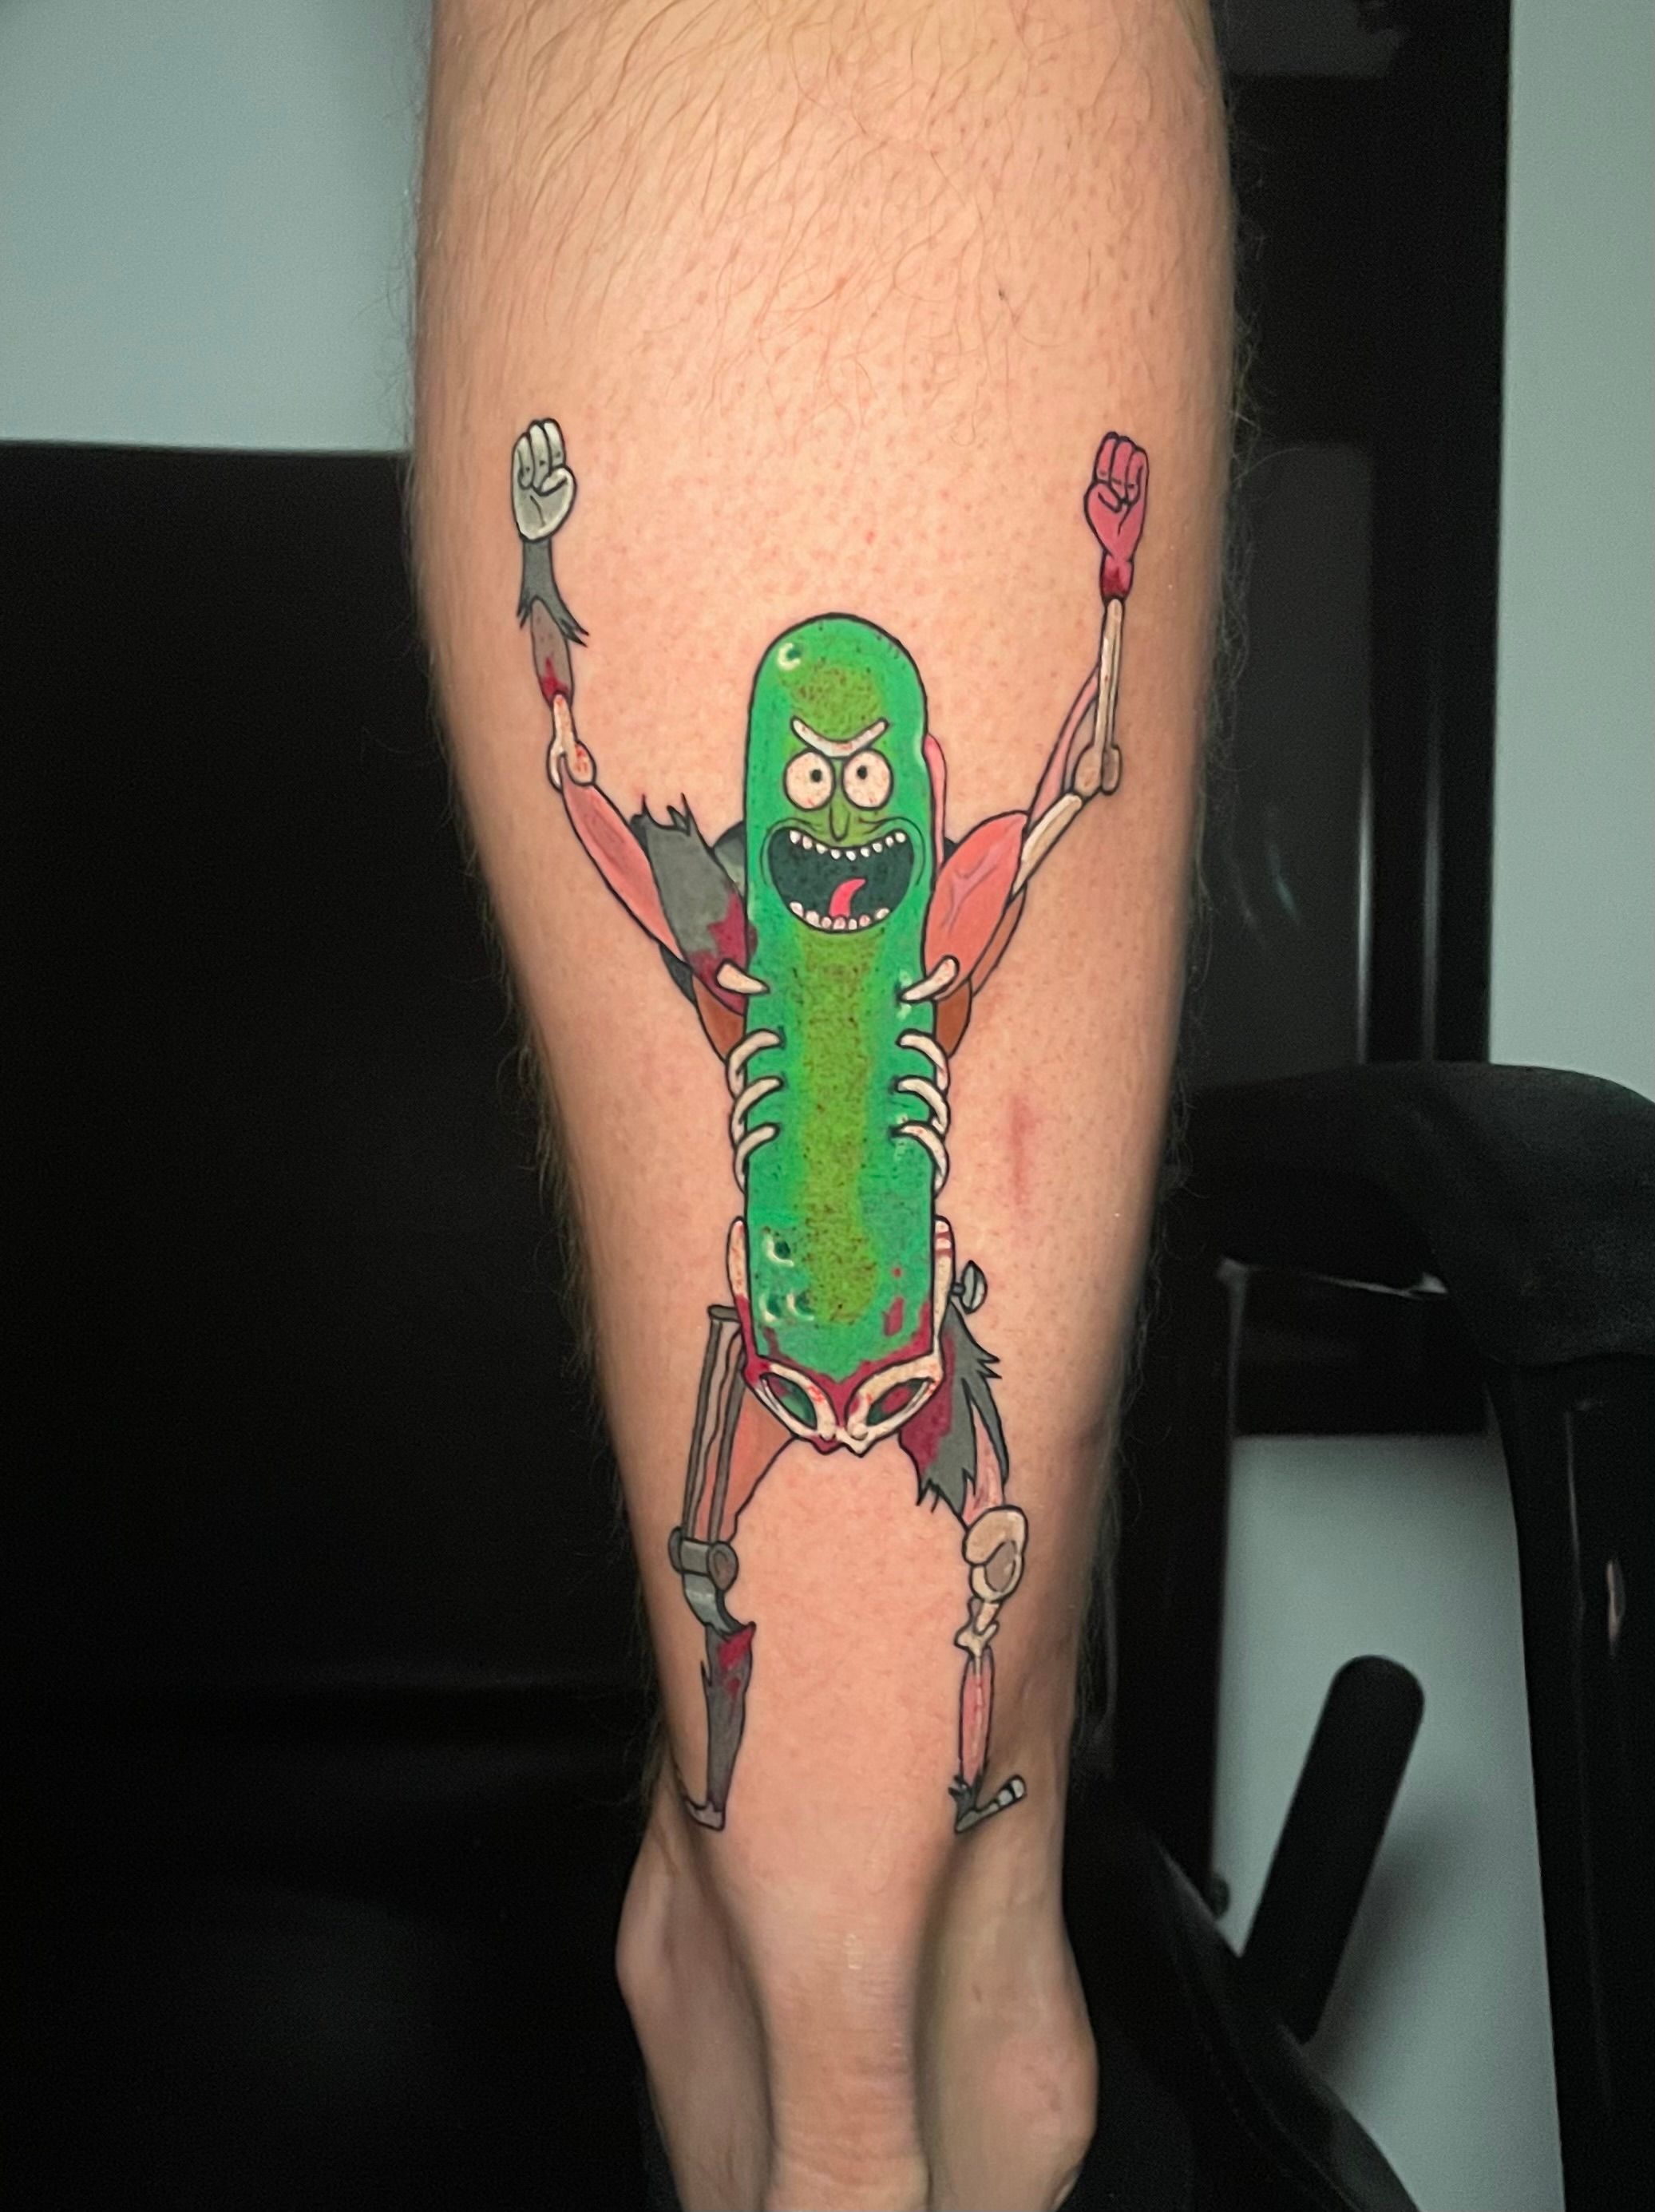  fka  Twitter पर This is the 5th result on google for Pickle Rick  tattoo  Twitter